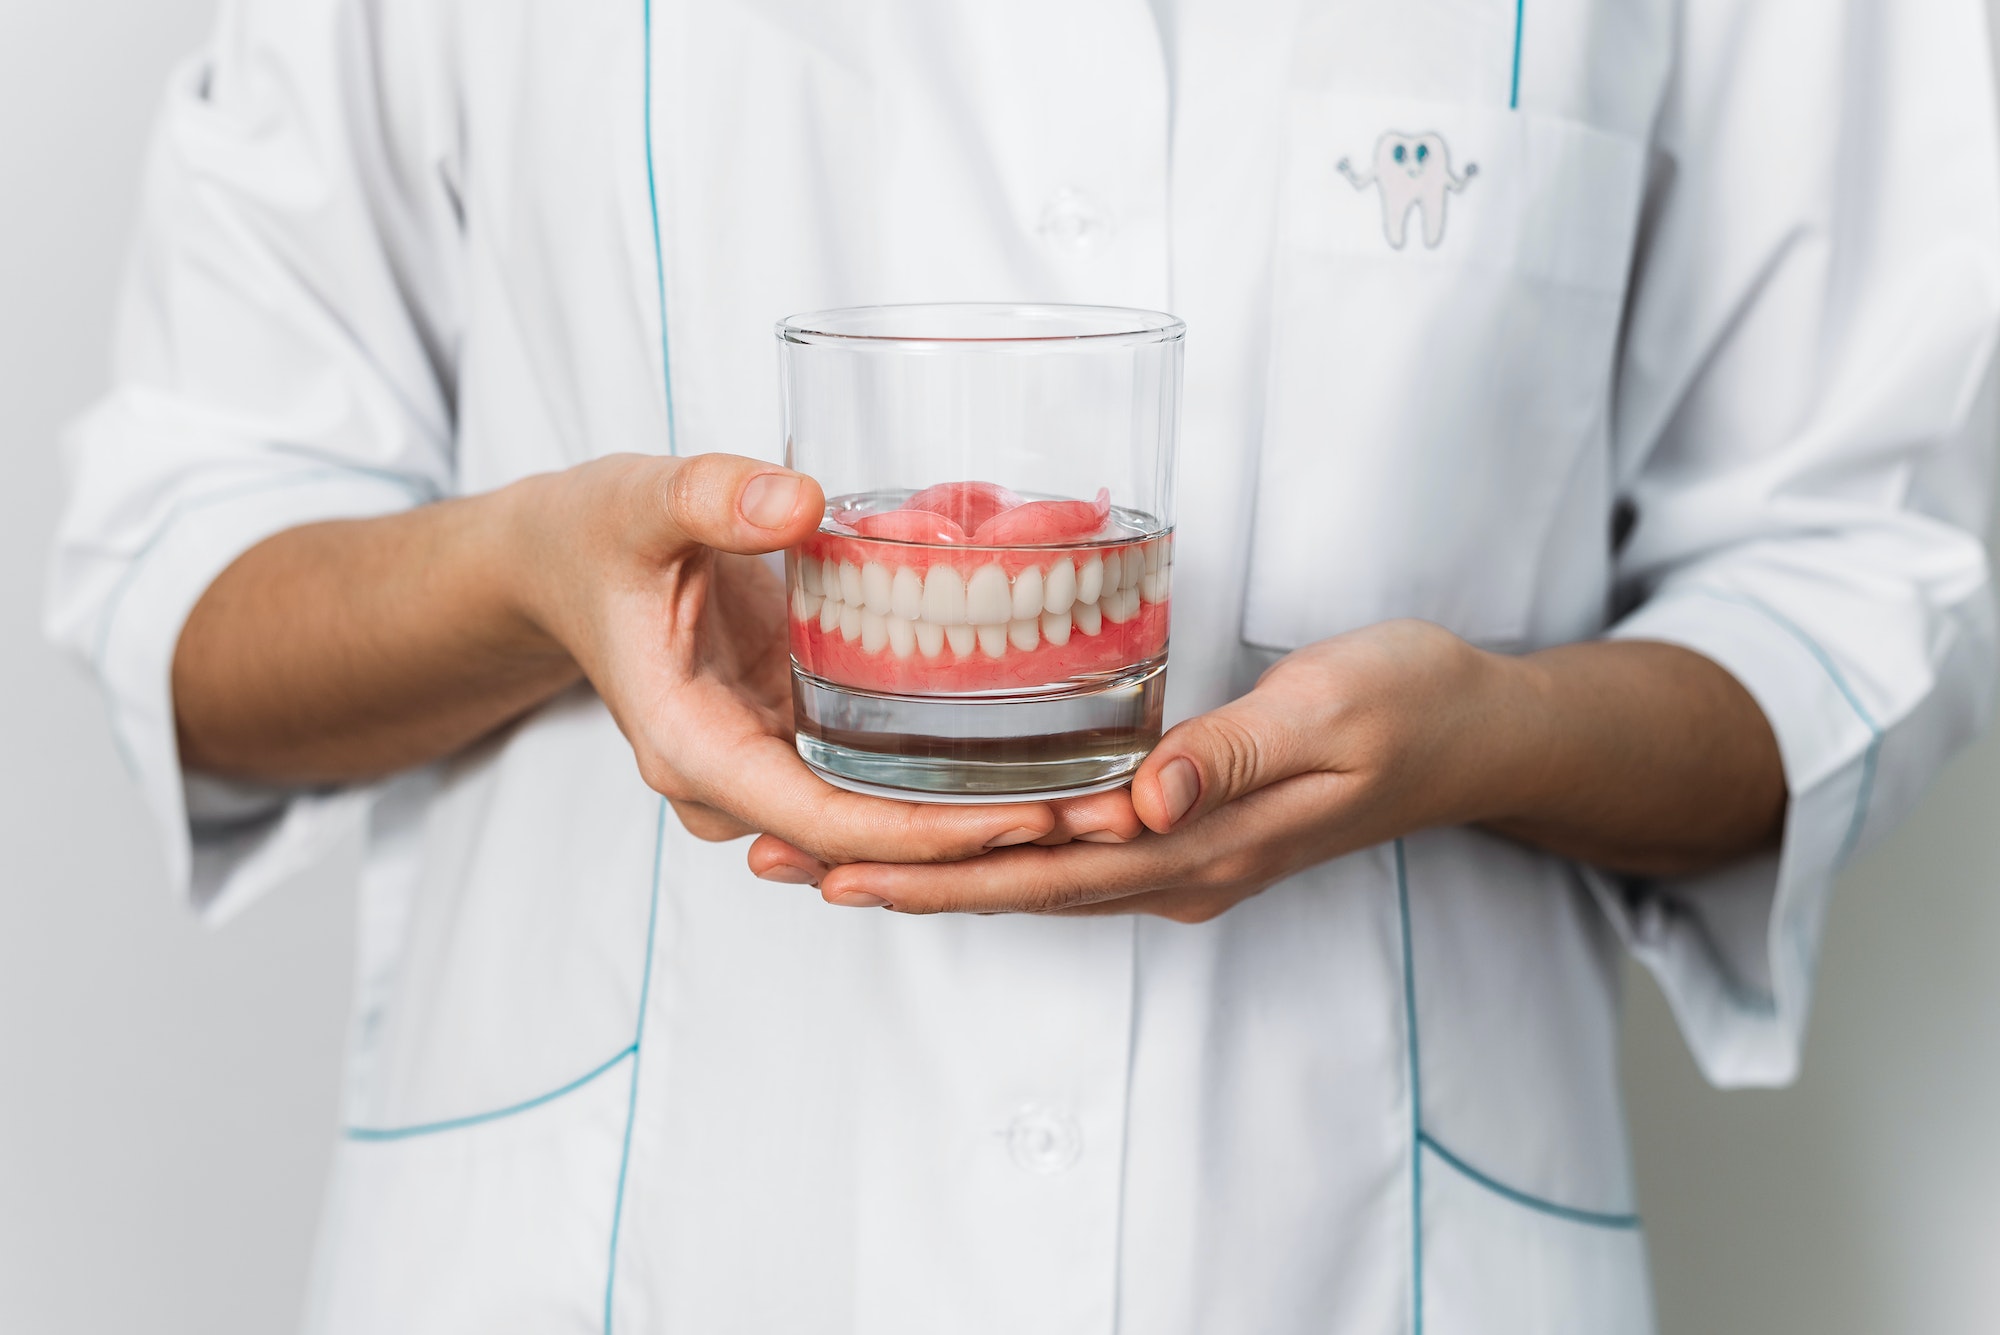 Prosthesis in a glass with a solution. Dental prosthesis care